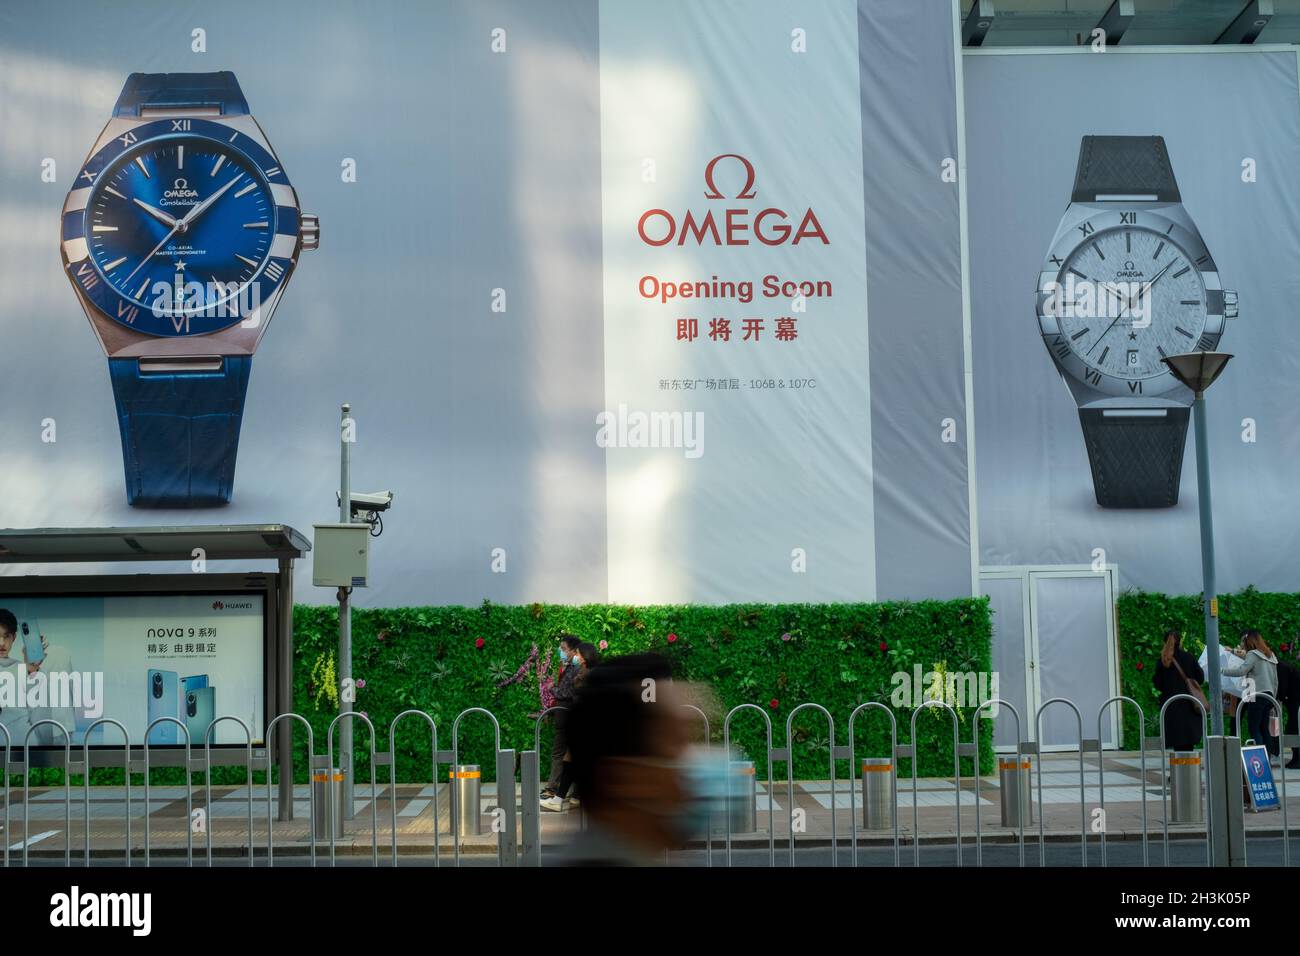 Billboard featuring OMEGA opening soon in Beijing, China. 29-Oct-2021 Stock Photo